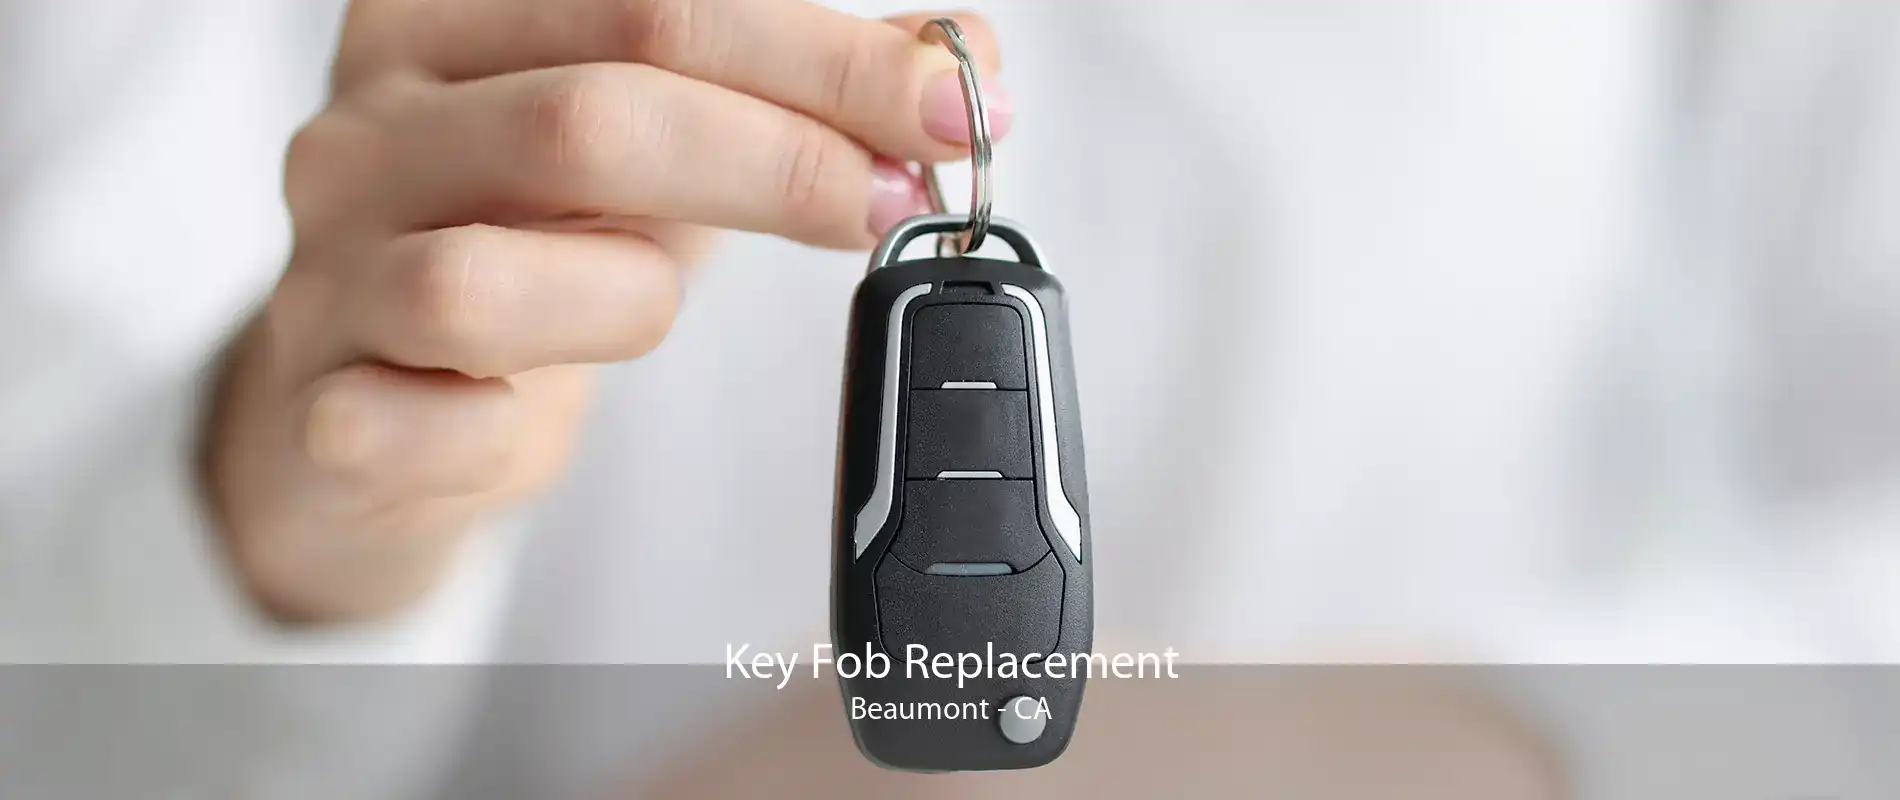 Key Fob Replacement Beaumont - CA